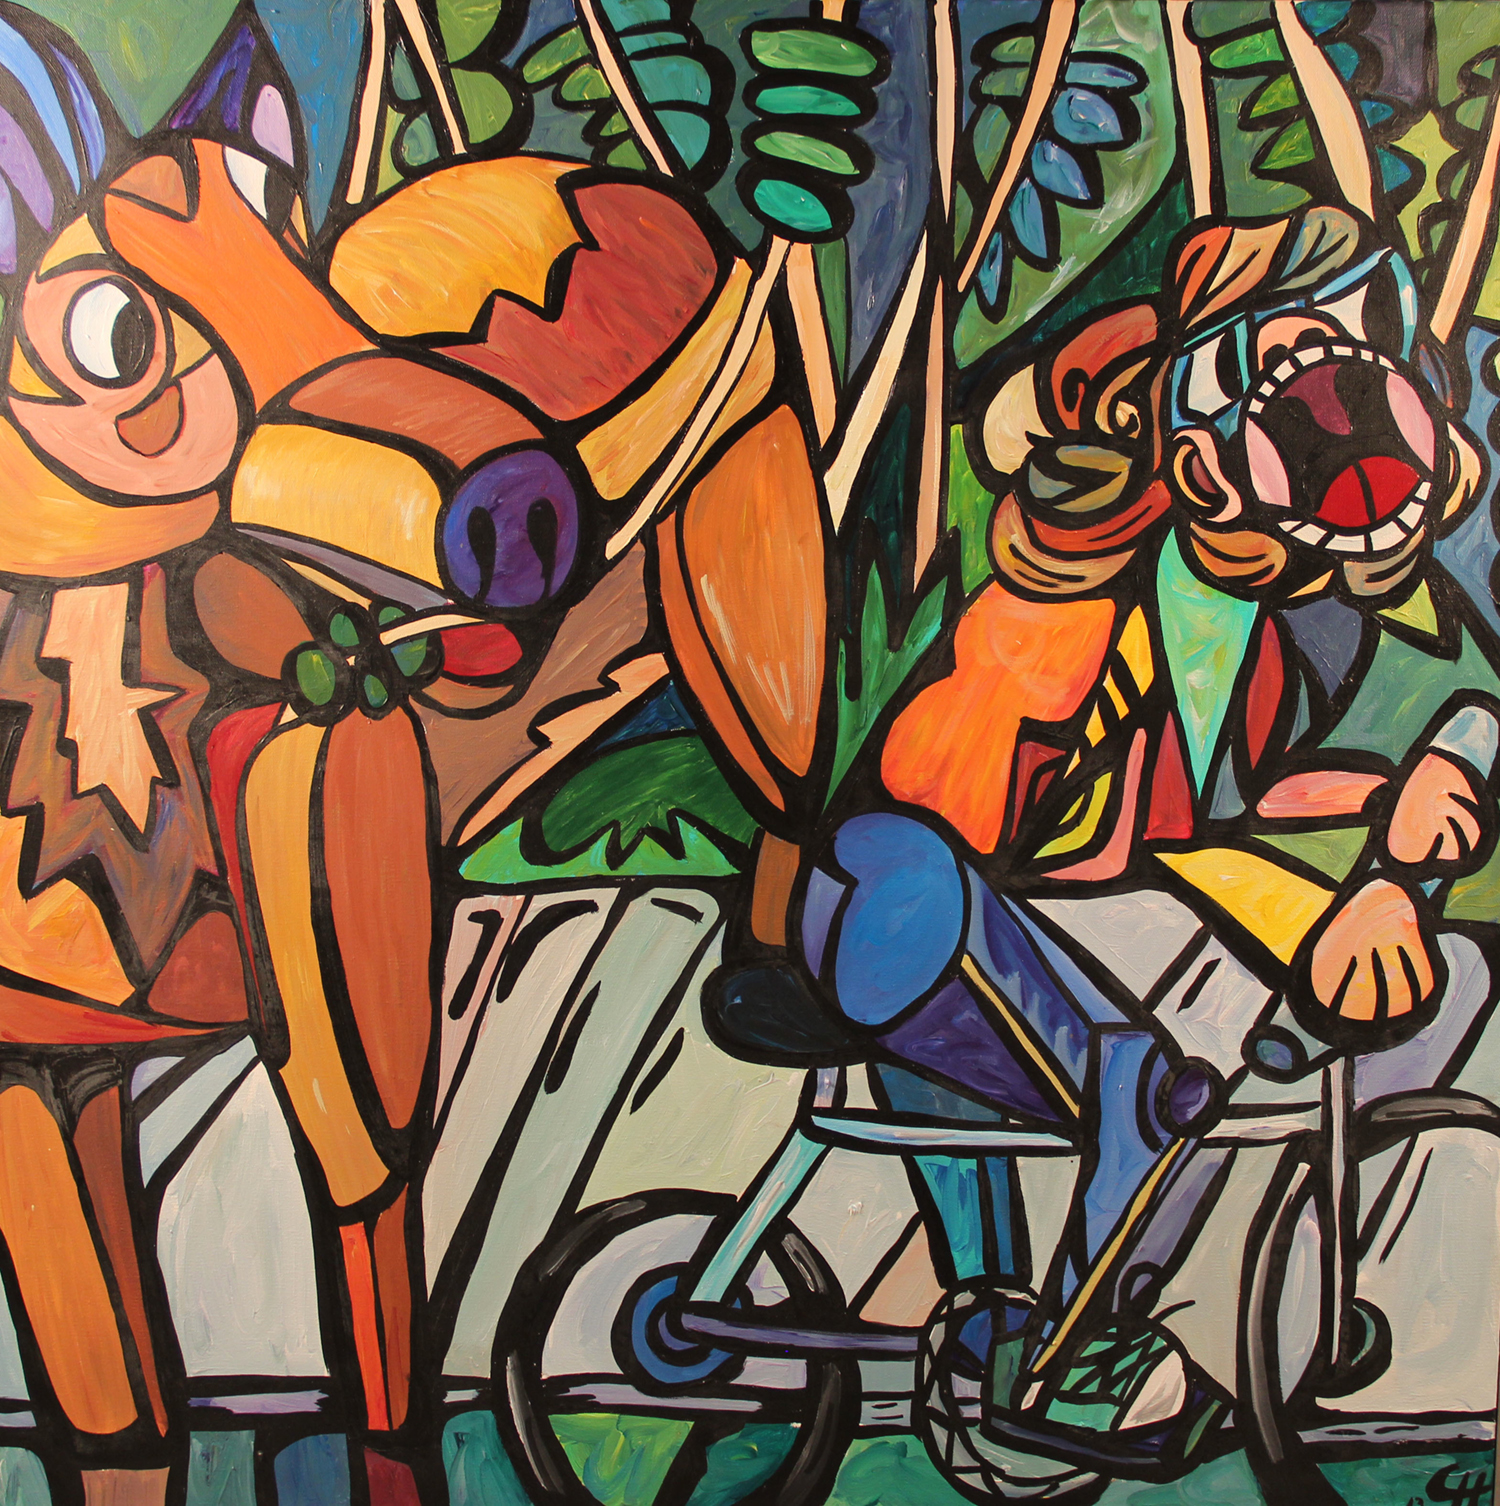 pop art-inspired painting with heavy lines and bright colors of a panicked person on a bike pedaling away from a moose. Image by Courtney Huston